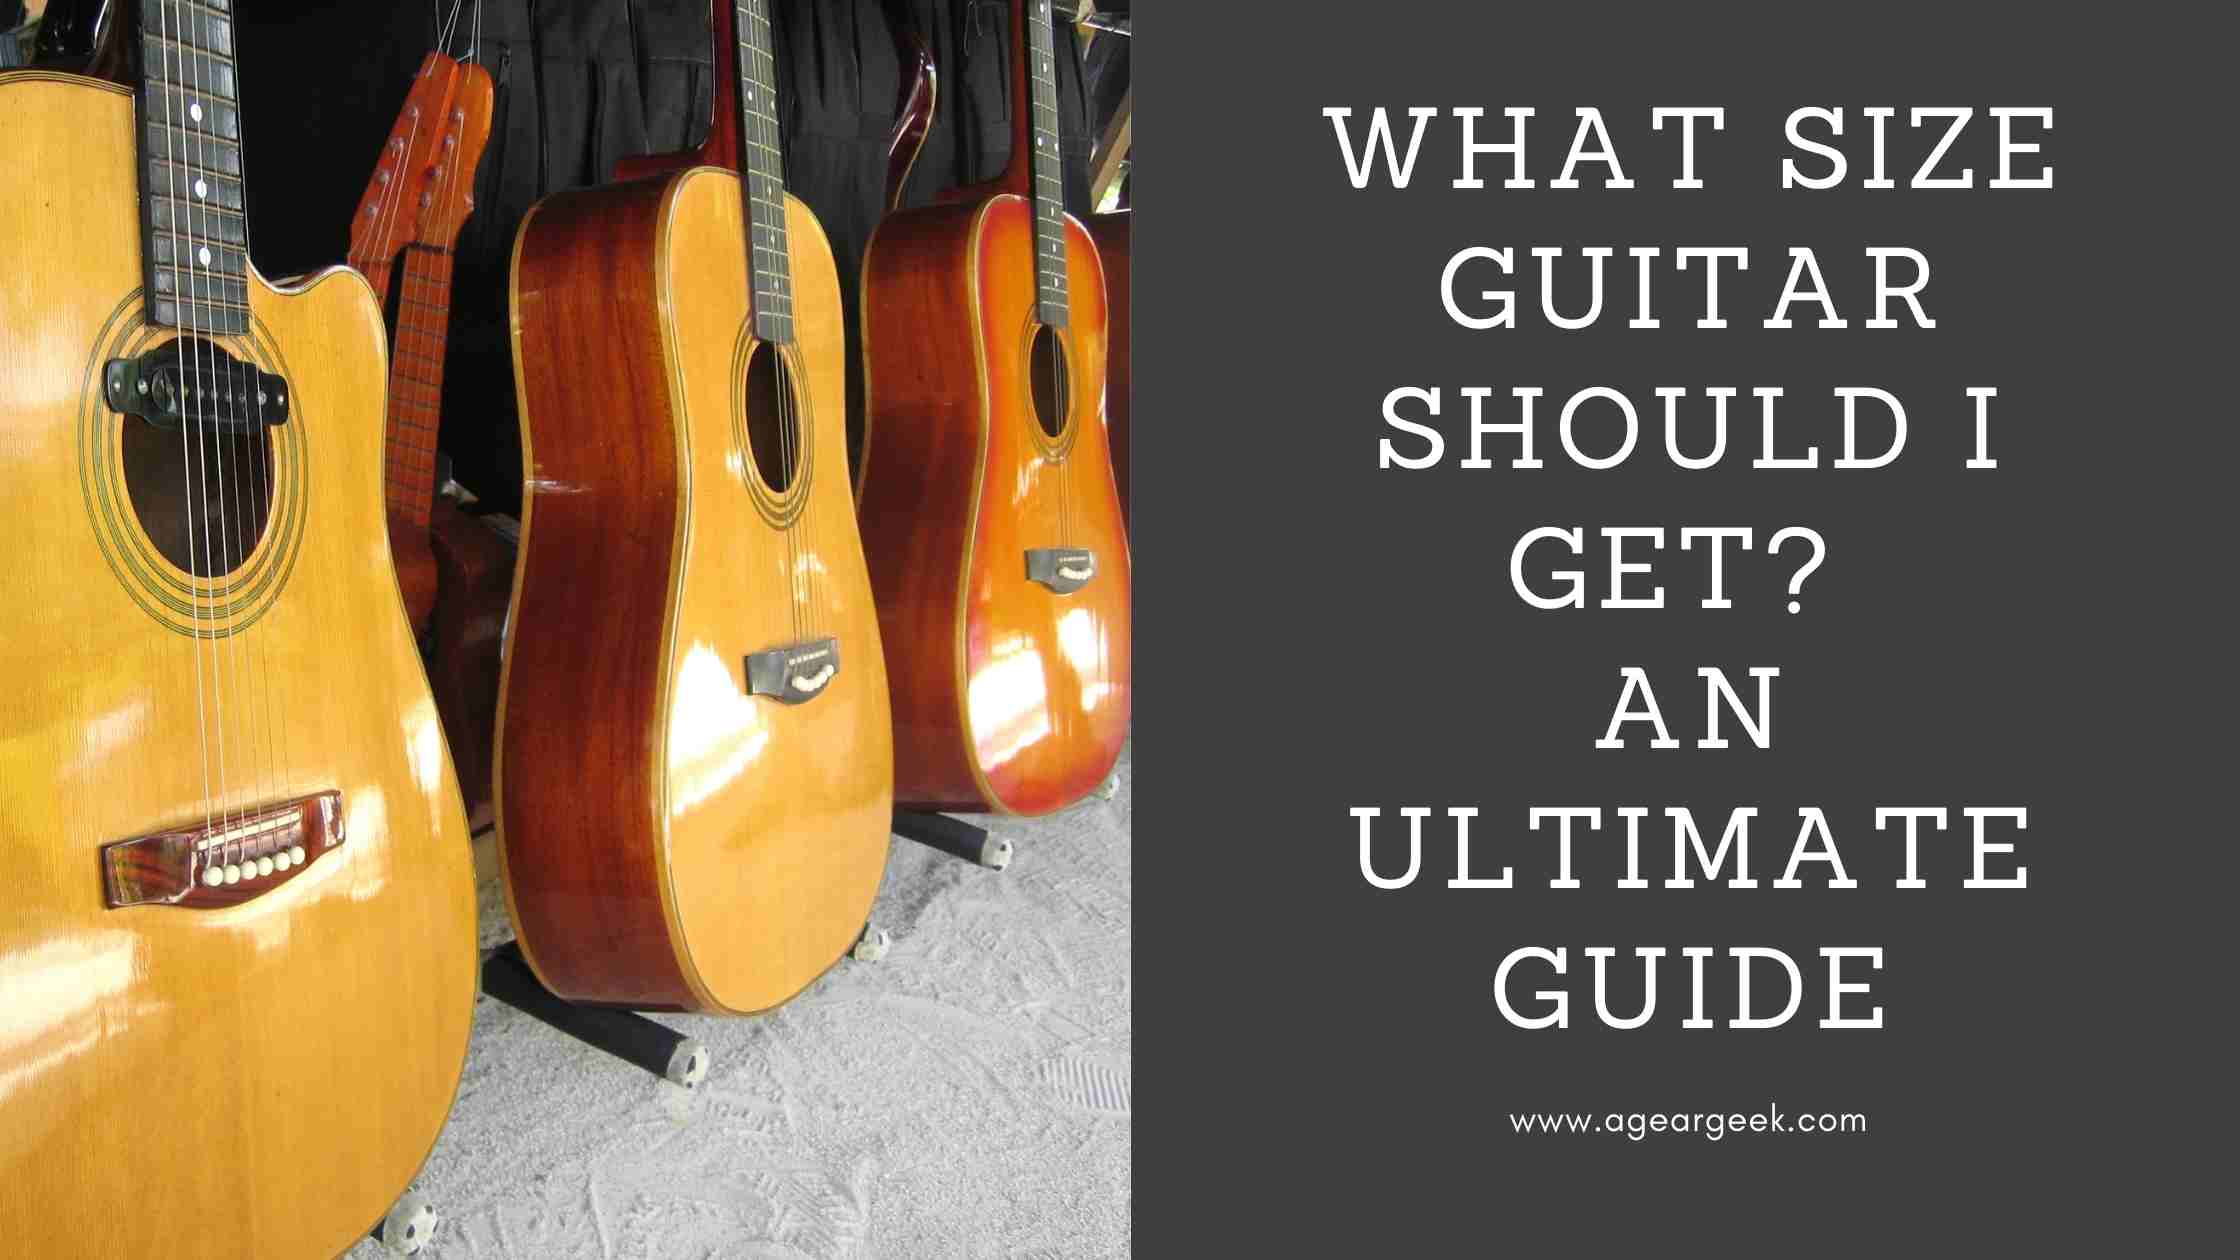 You are currently viewing What size guitar should I get? An Ultimate Guide